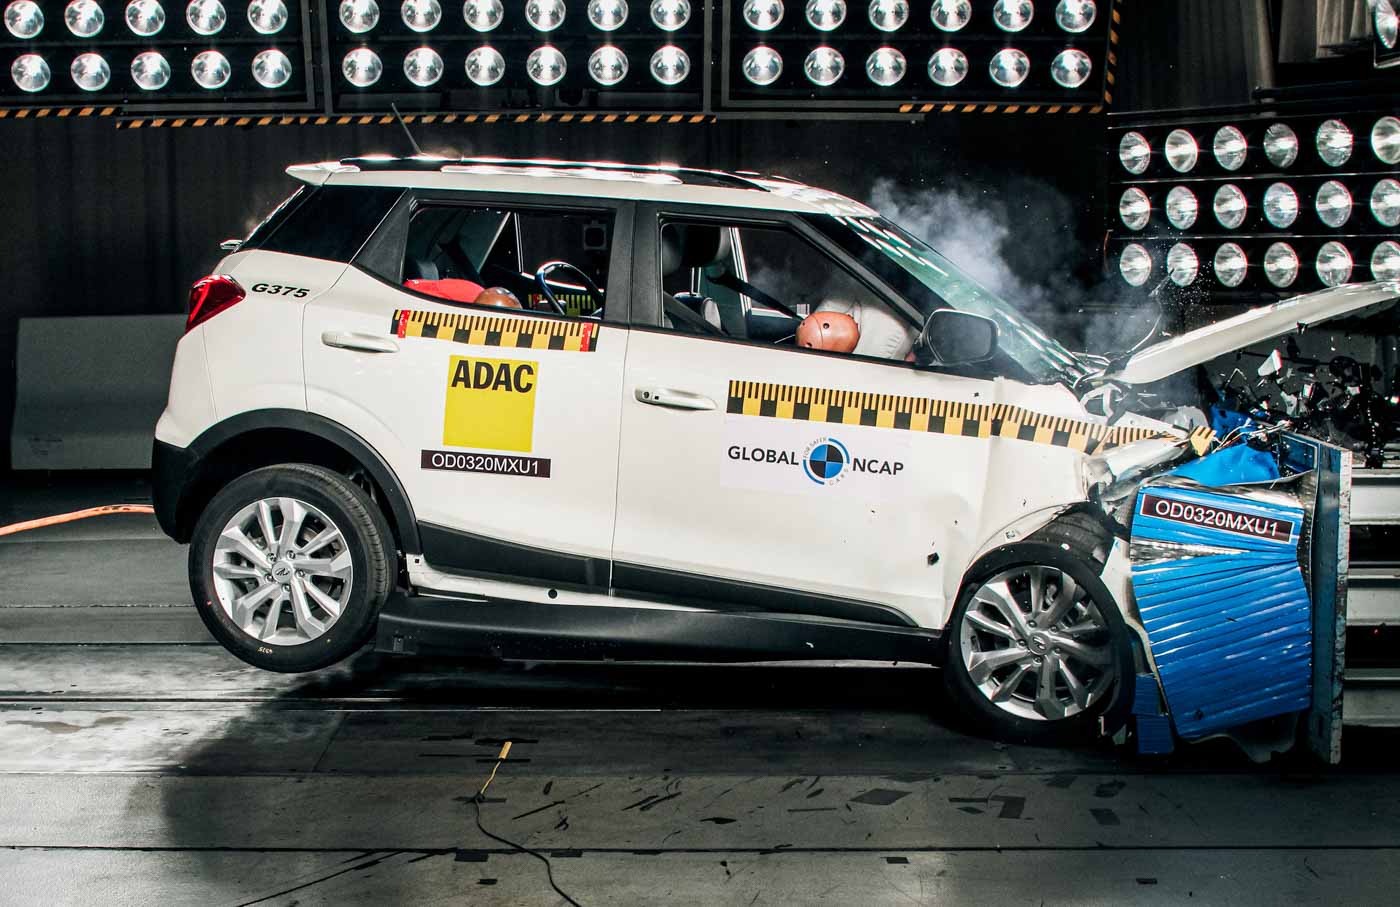 5Star Global NCAP Rated Cars For Under Rs. 10 Lakh